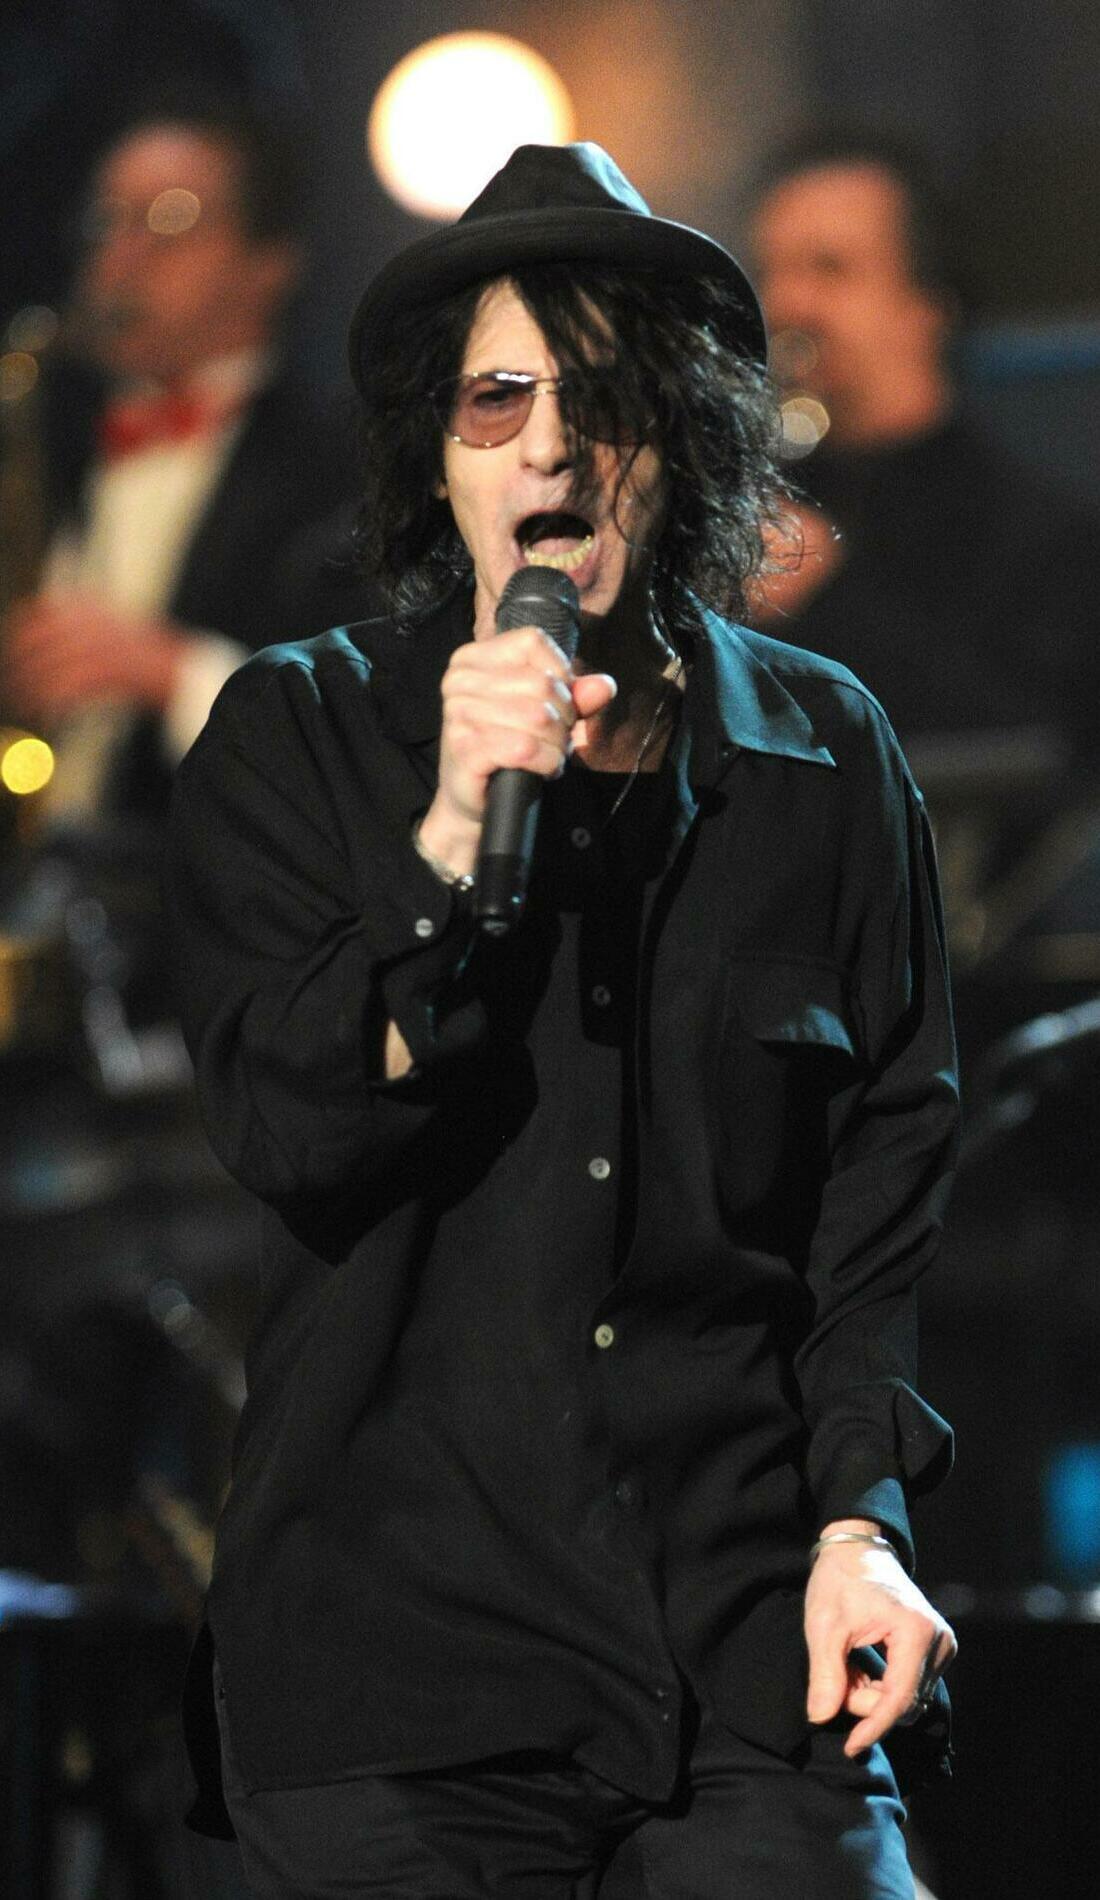 A Peter Wolf live event